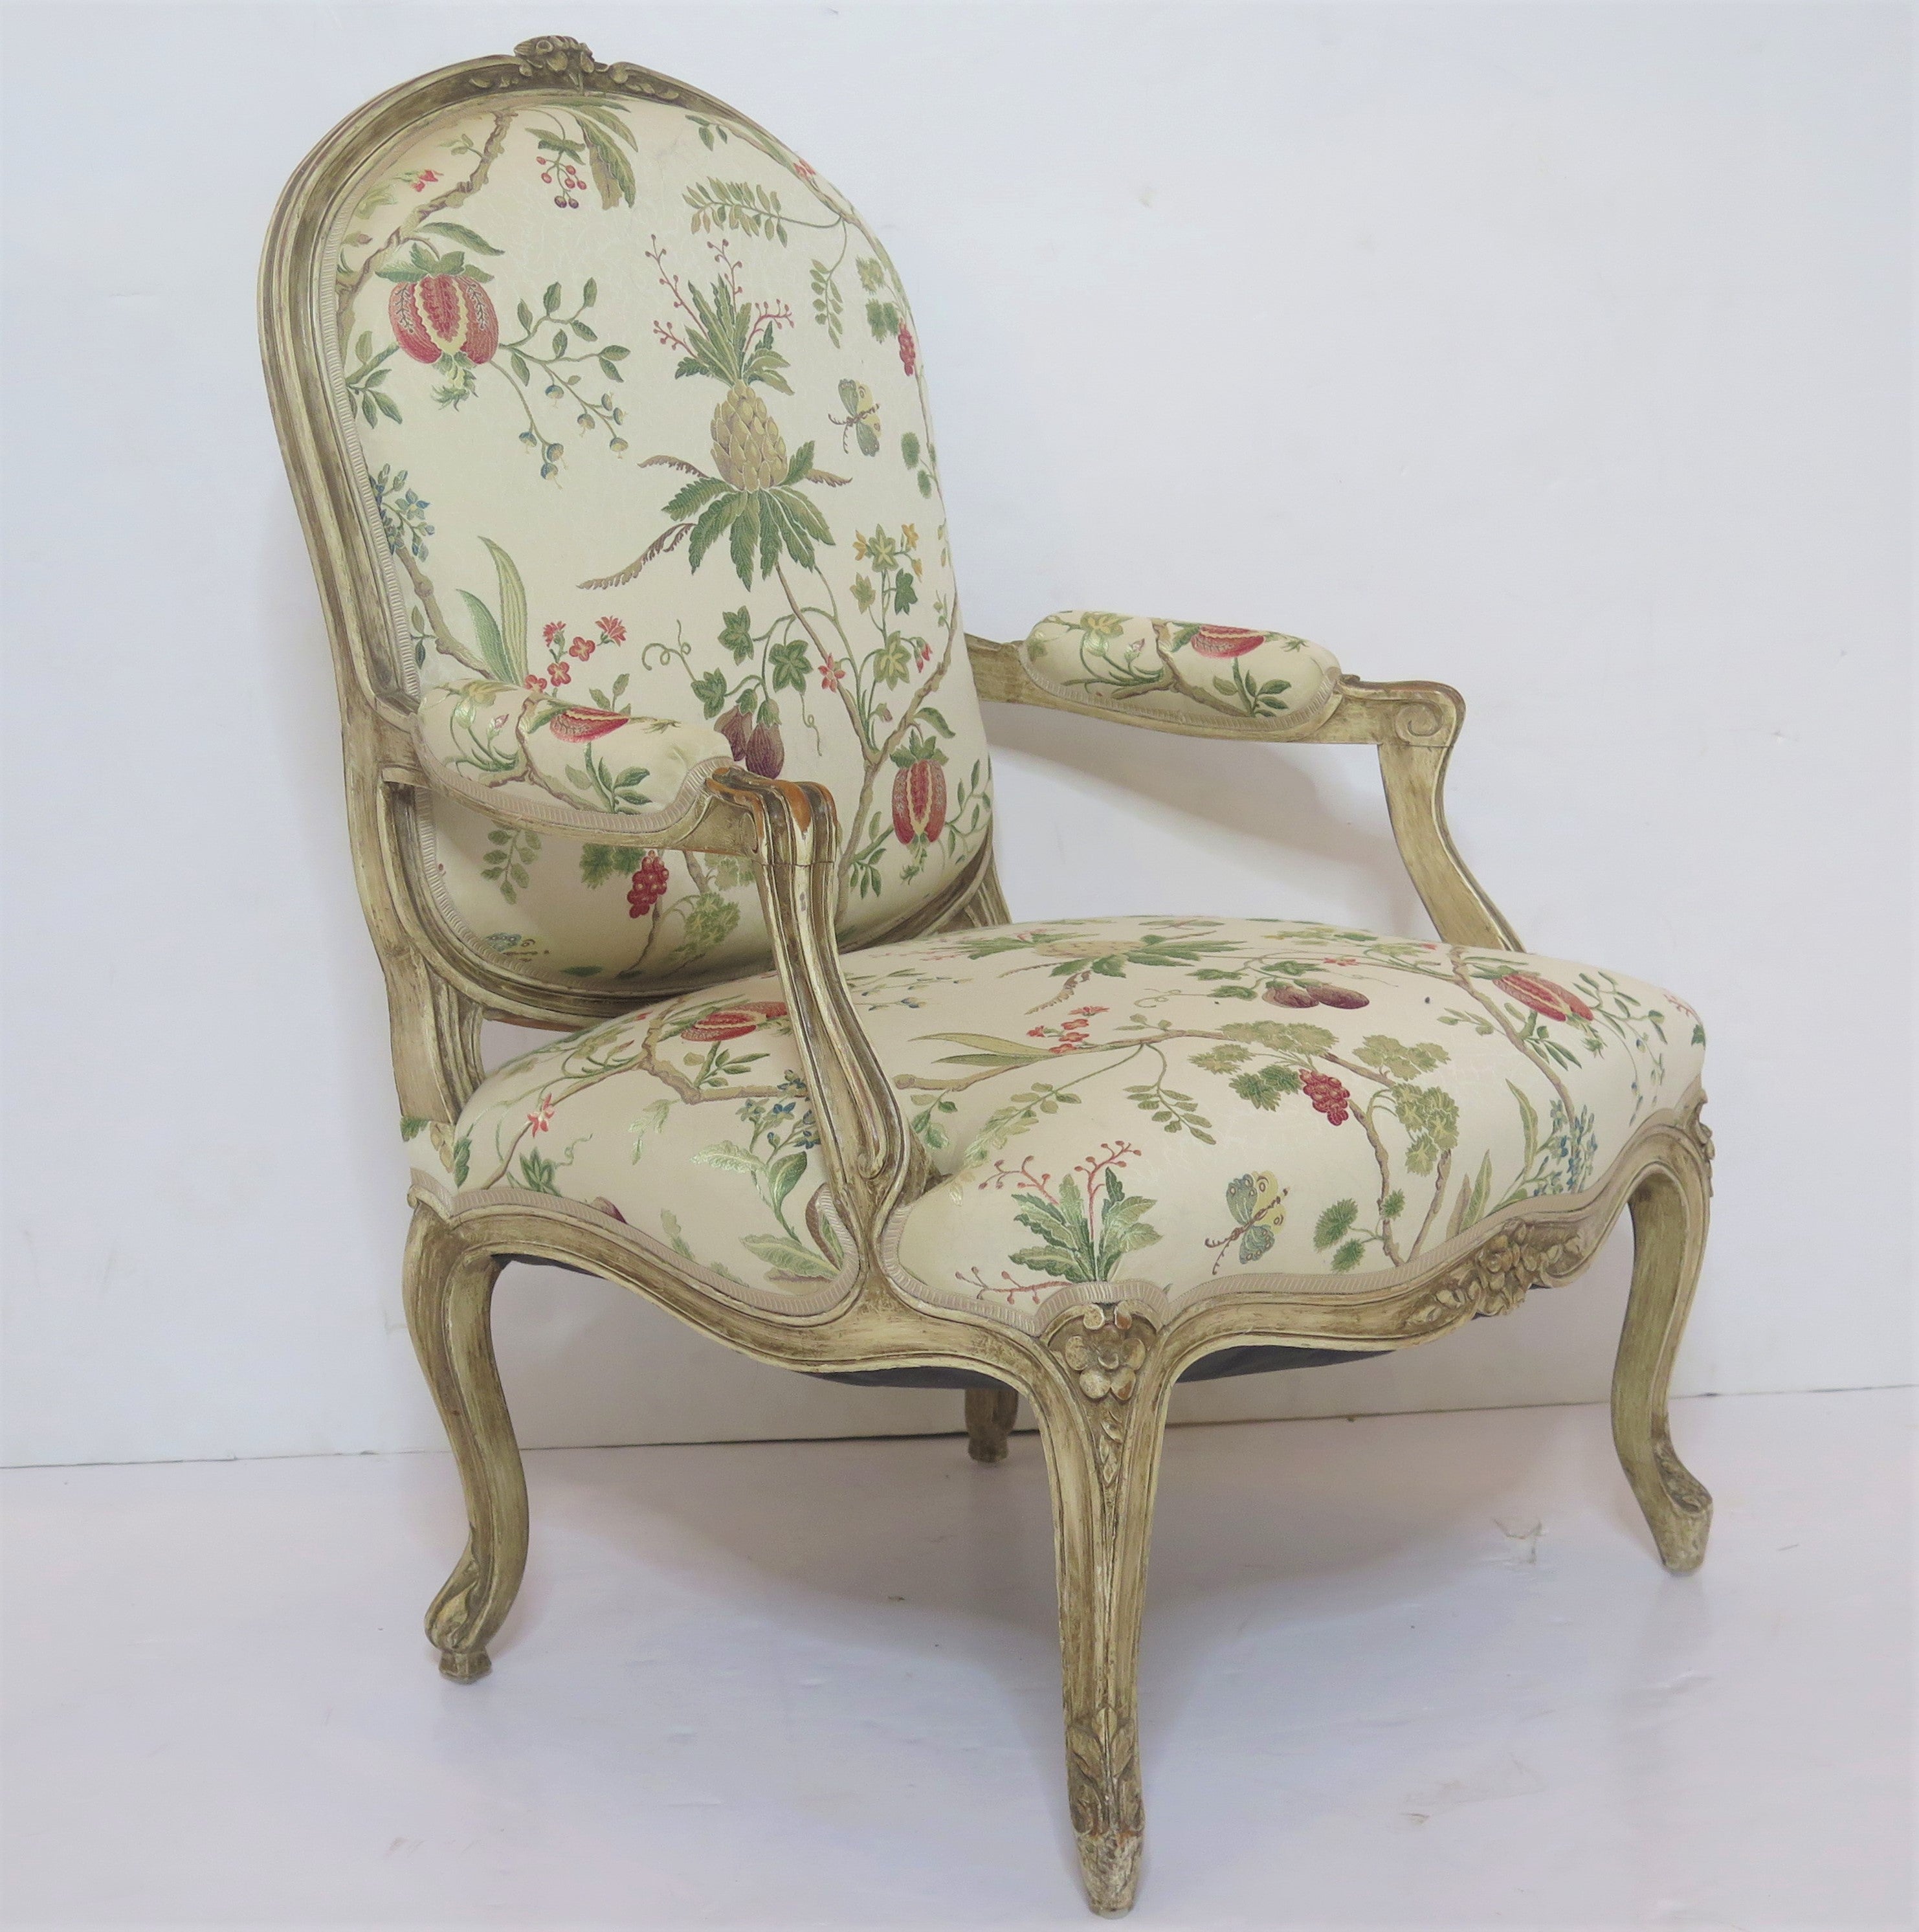 Louis XV-style painted fauteuil with Scalamandré fabric upholstery, pattern La Perouse, multi on ivory (CL 0001 26148), featuring pineapples, pomegranates, and figs (exotic fruits), Italian fabric, France, early 20th century